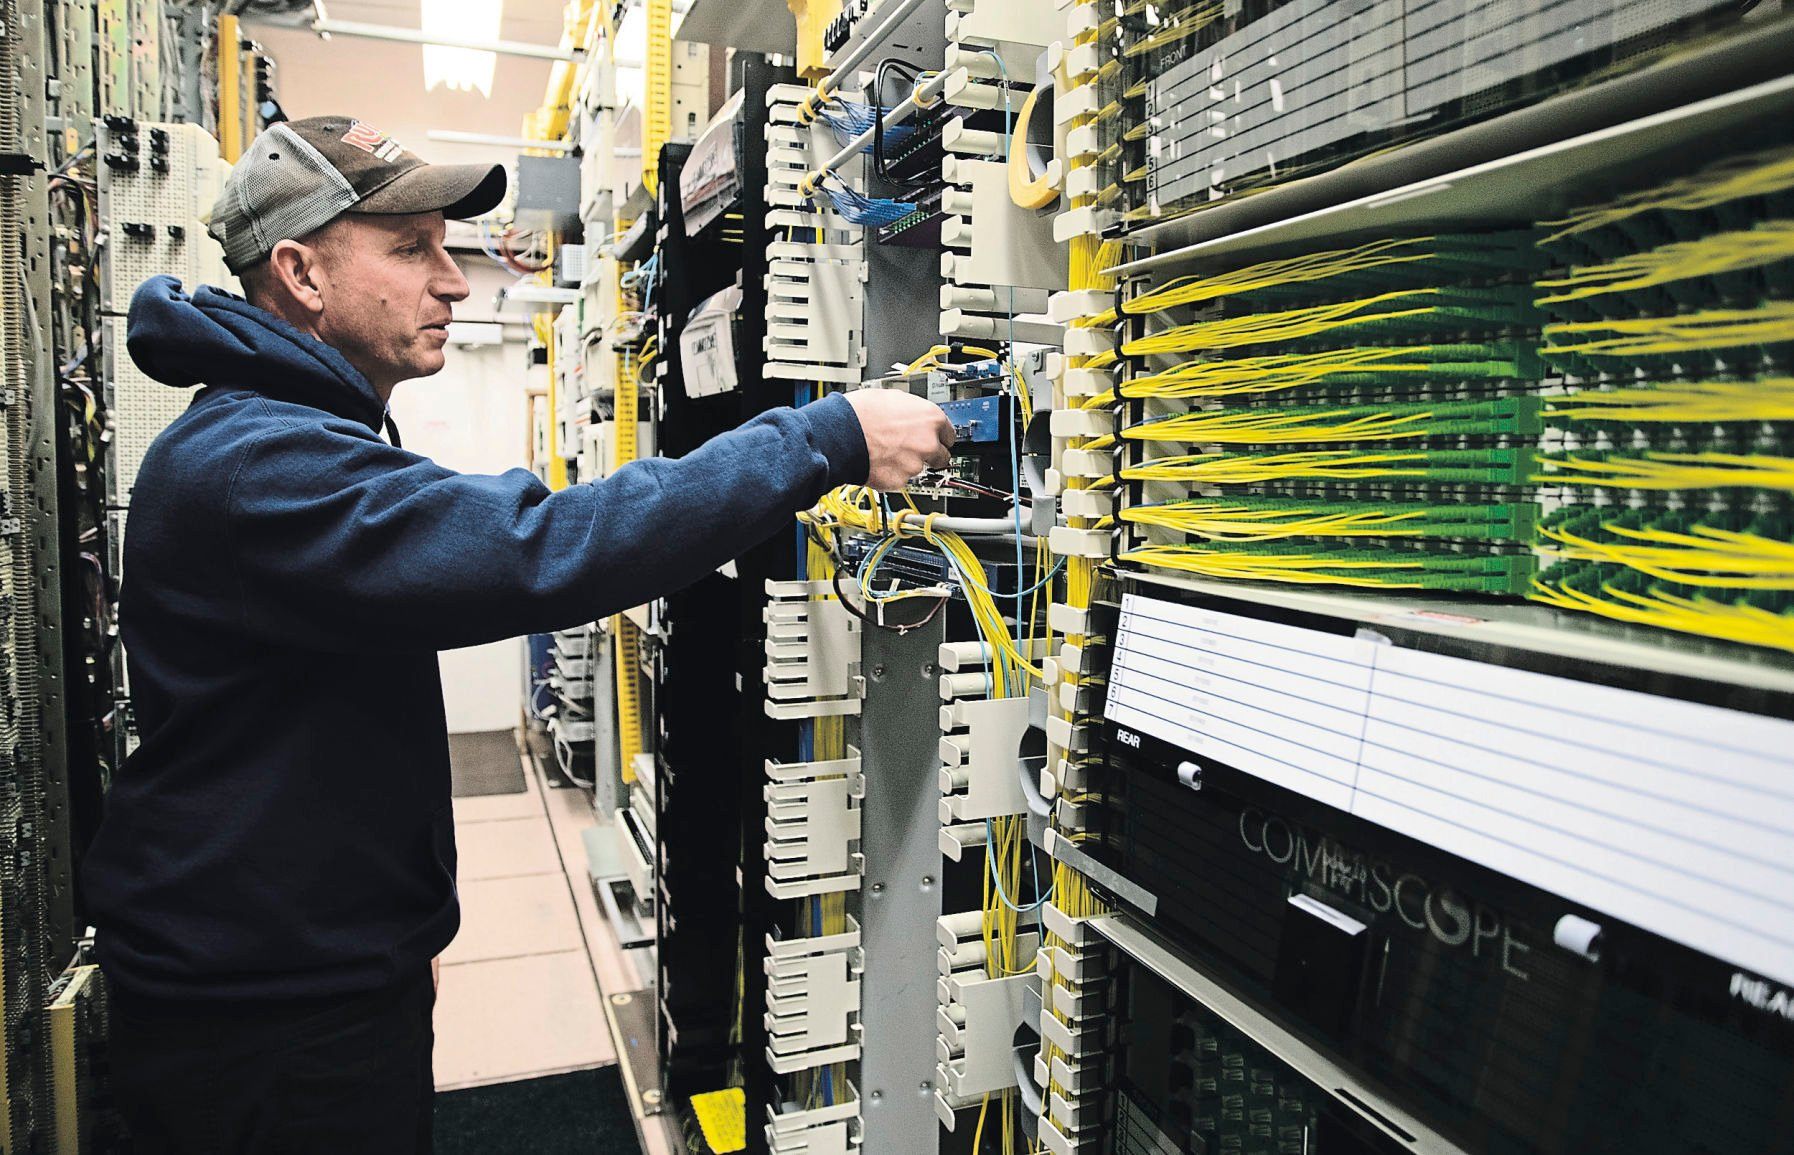 Technician Jerry Cullen works with the new switching technology.    PHOTO CREDIT: Stephen Gassman